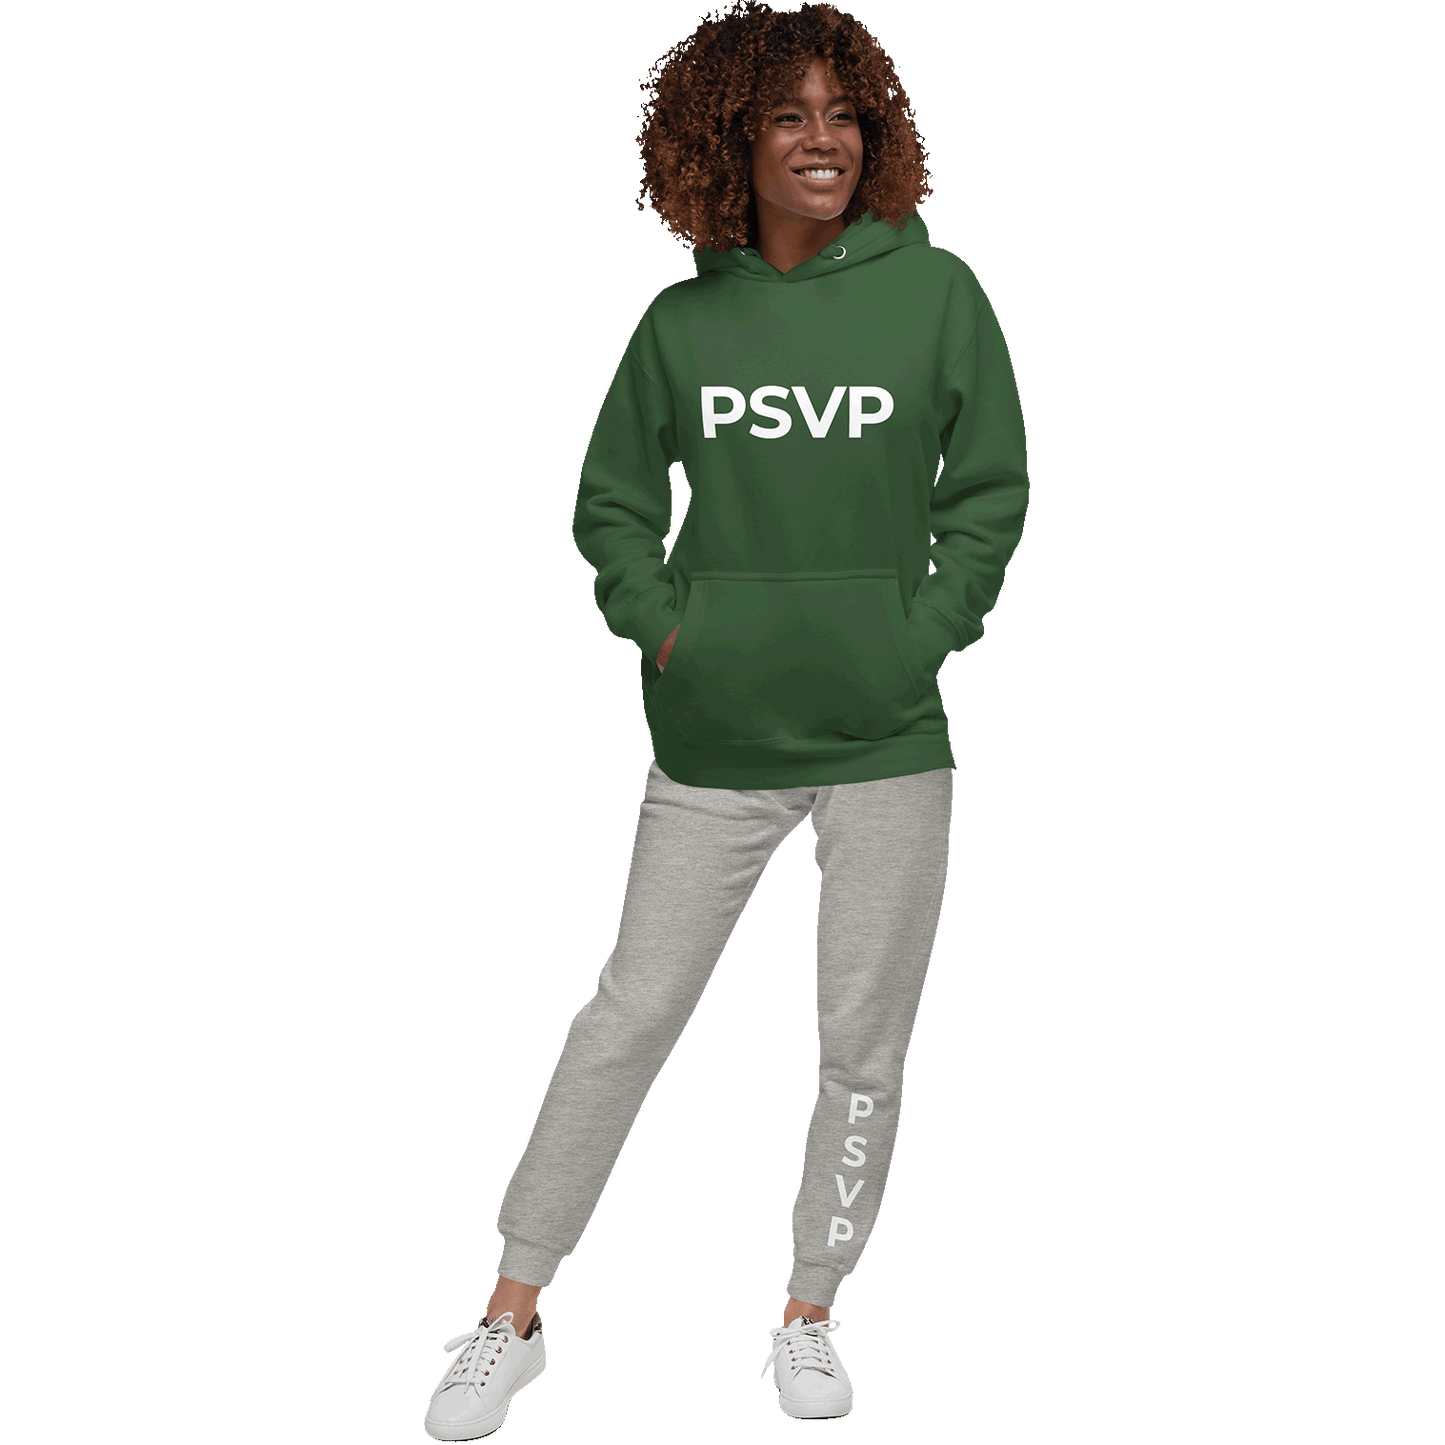 Load image into Gallery viewer, Soft Forest Green Hoodie - PSVP | Hoodie | PARADIS SVP
